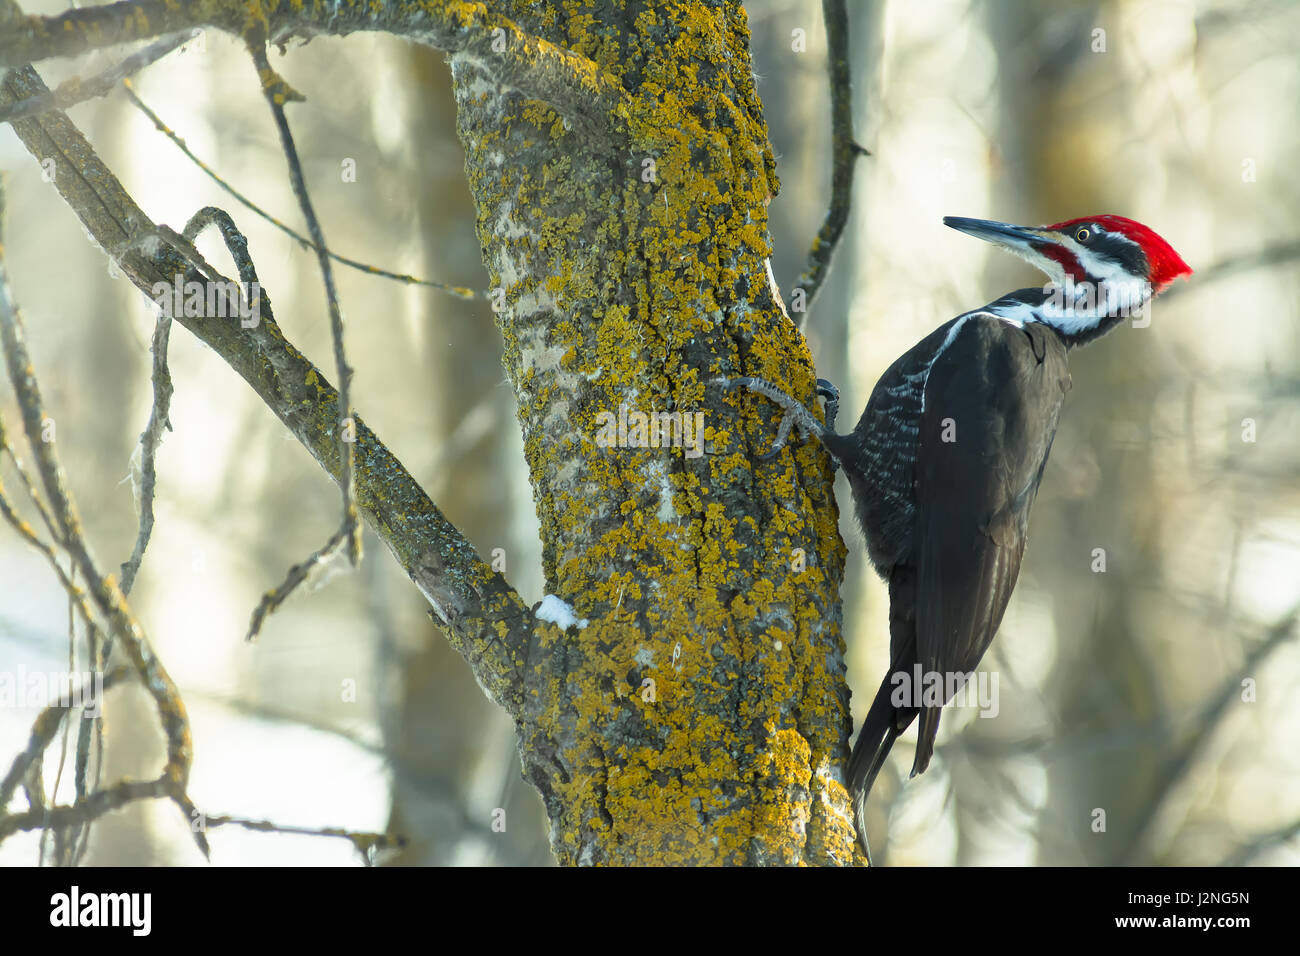 Pileated woodpecker, Hylatomus pileatus, excavating a hole in a moss-covered poplar tree, in St Albert, Alberta, Canada Stock Photo